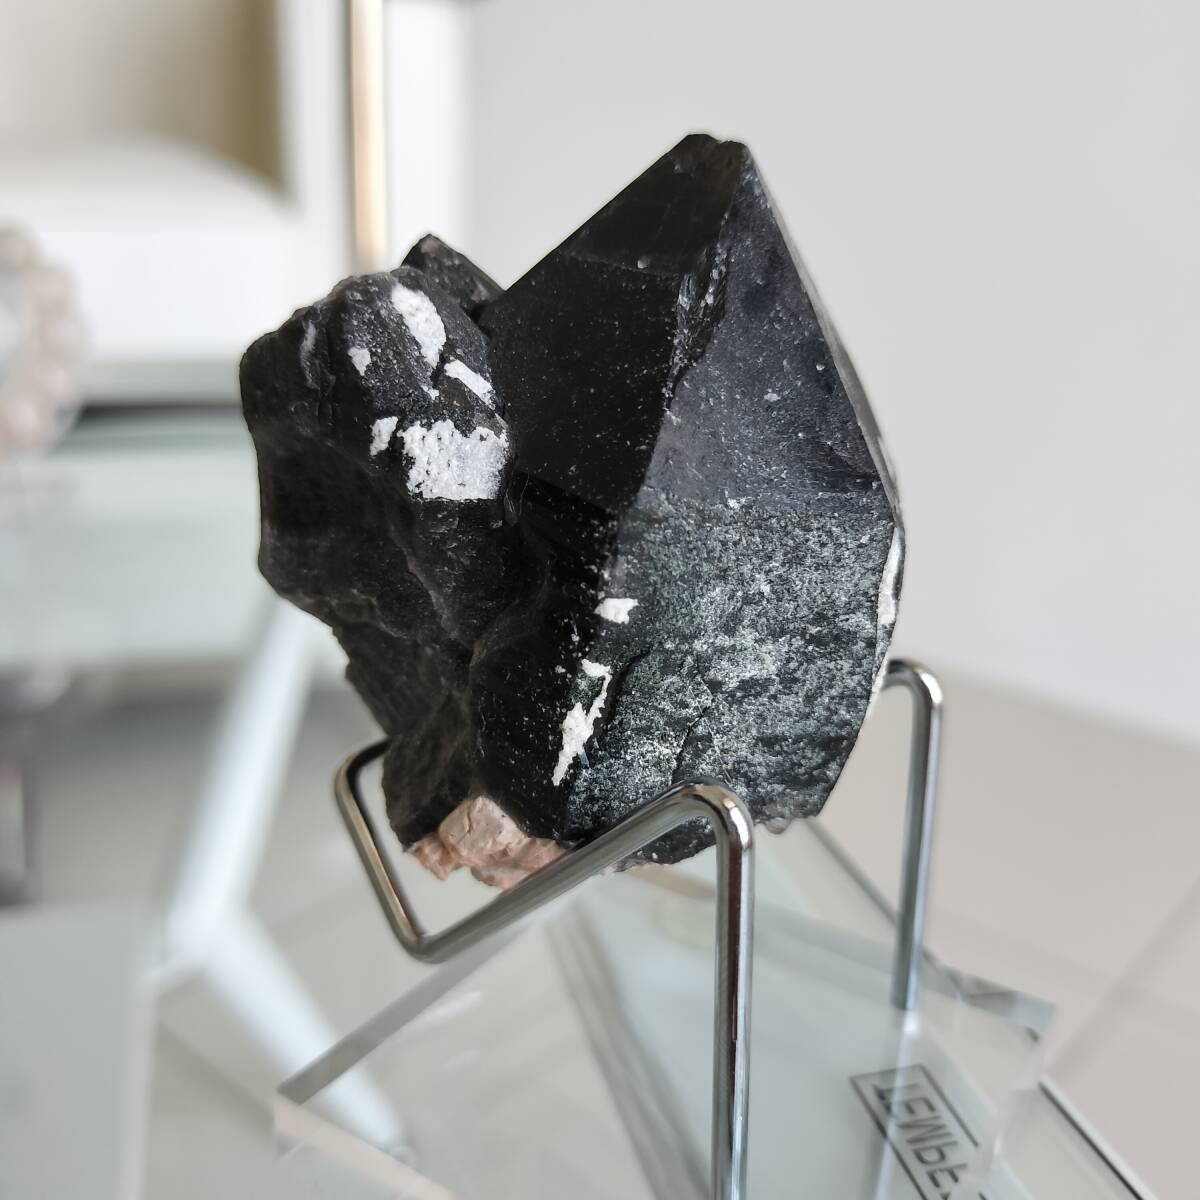 Highest quality Morion = Black Quartz [YhUW] Raw Stone from Shandong Province, China Interior with pedestal Amulet, Handmade items, interior, miscellaneous goods, ornament, object